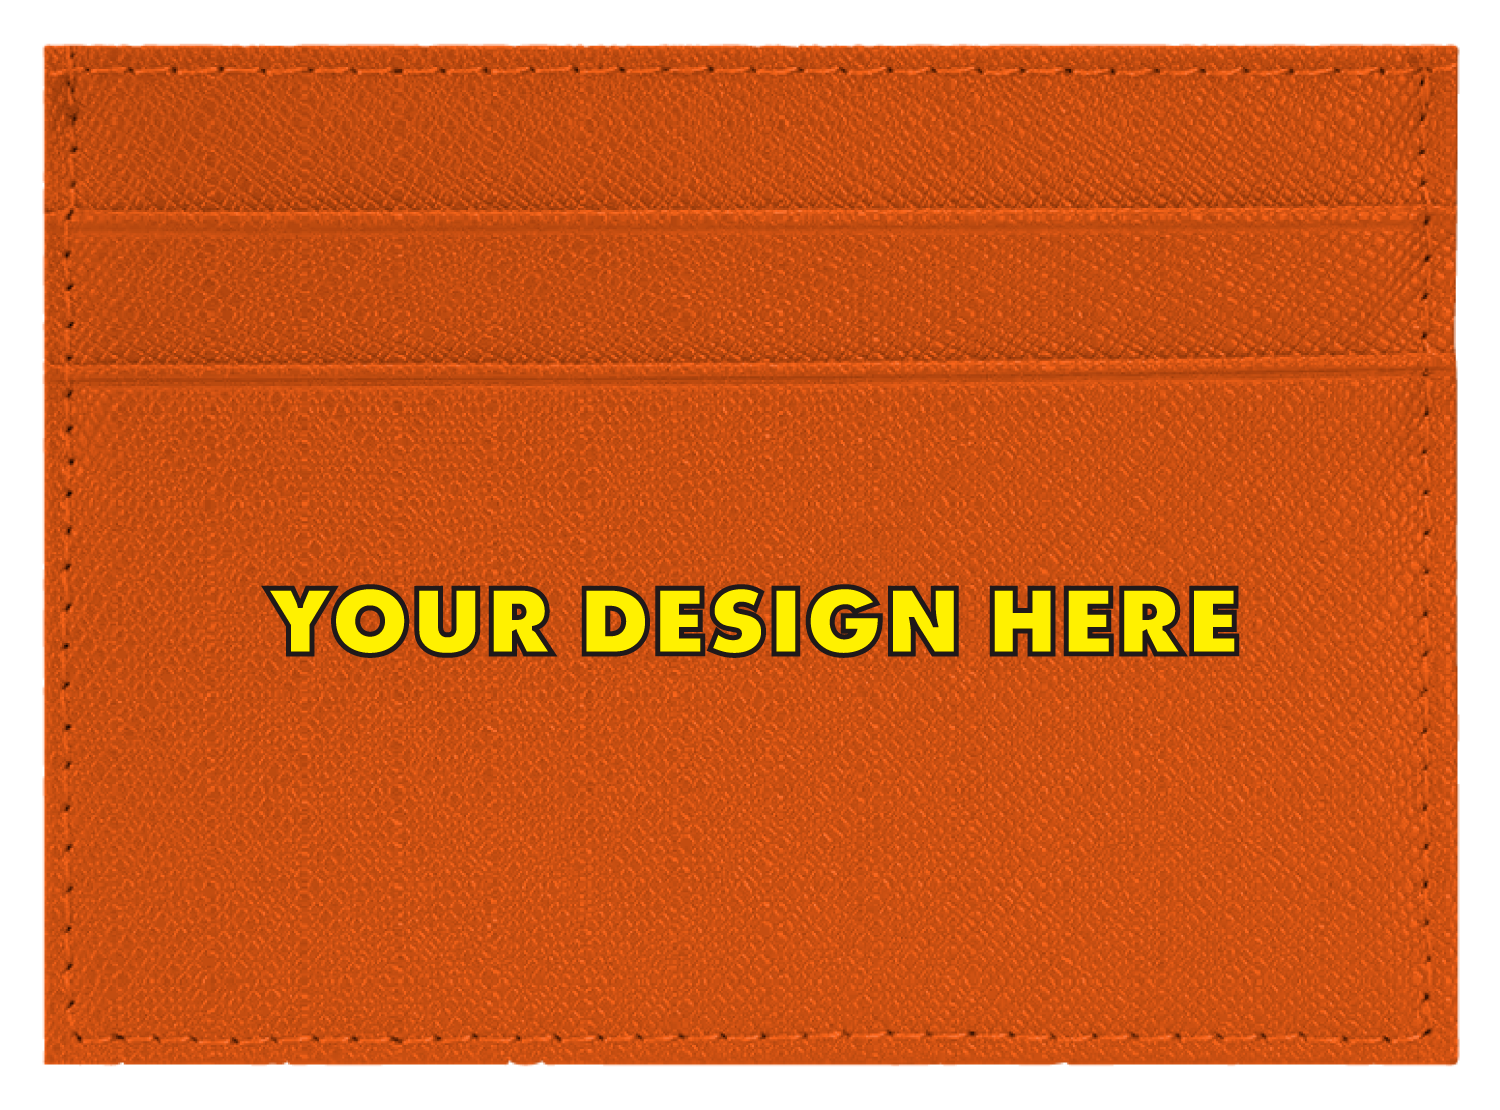 Create Your Own - Leather Wallet (Orange)